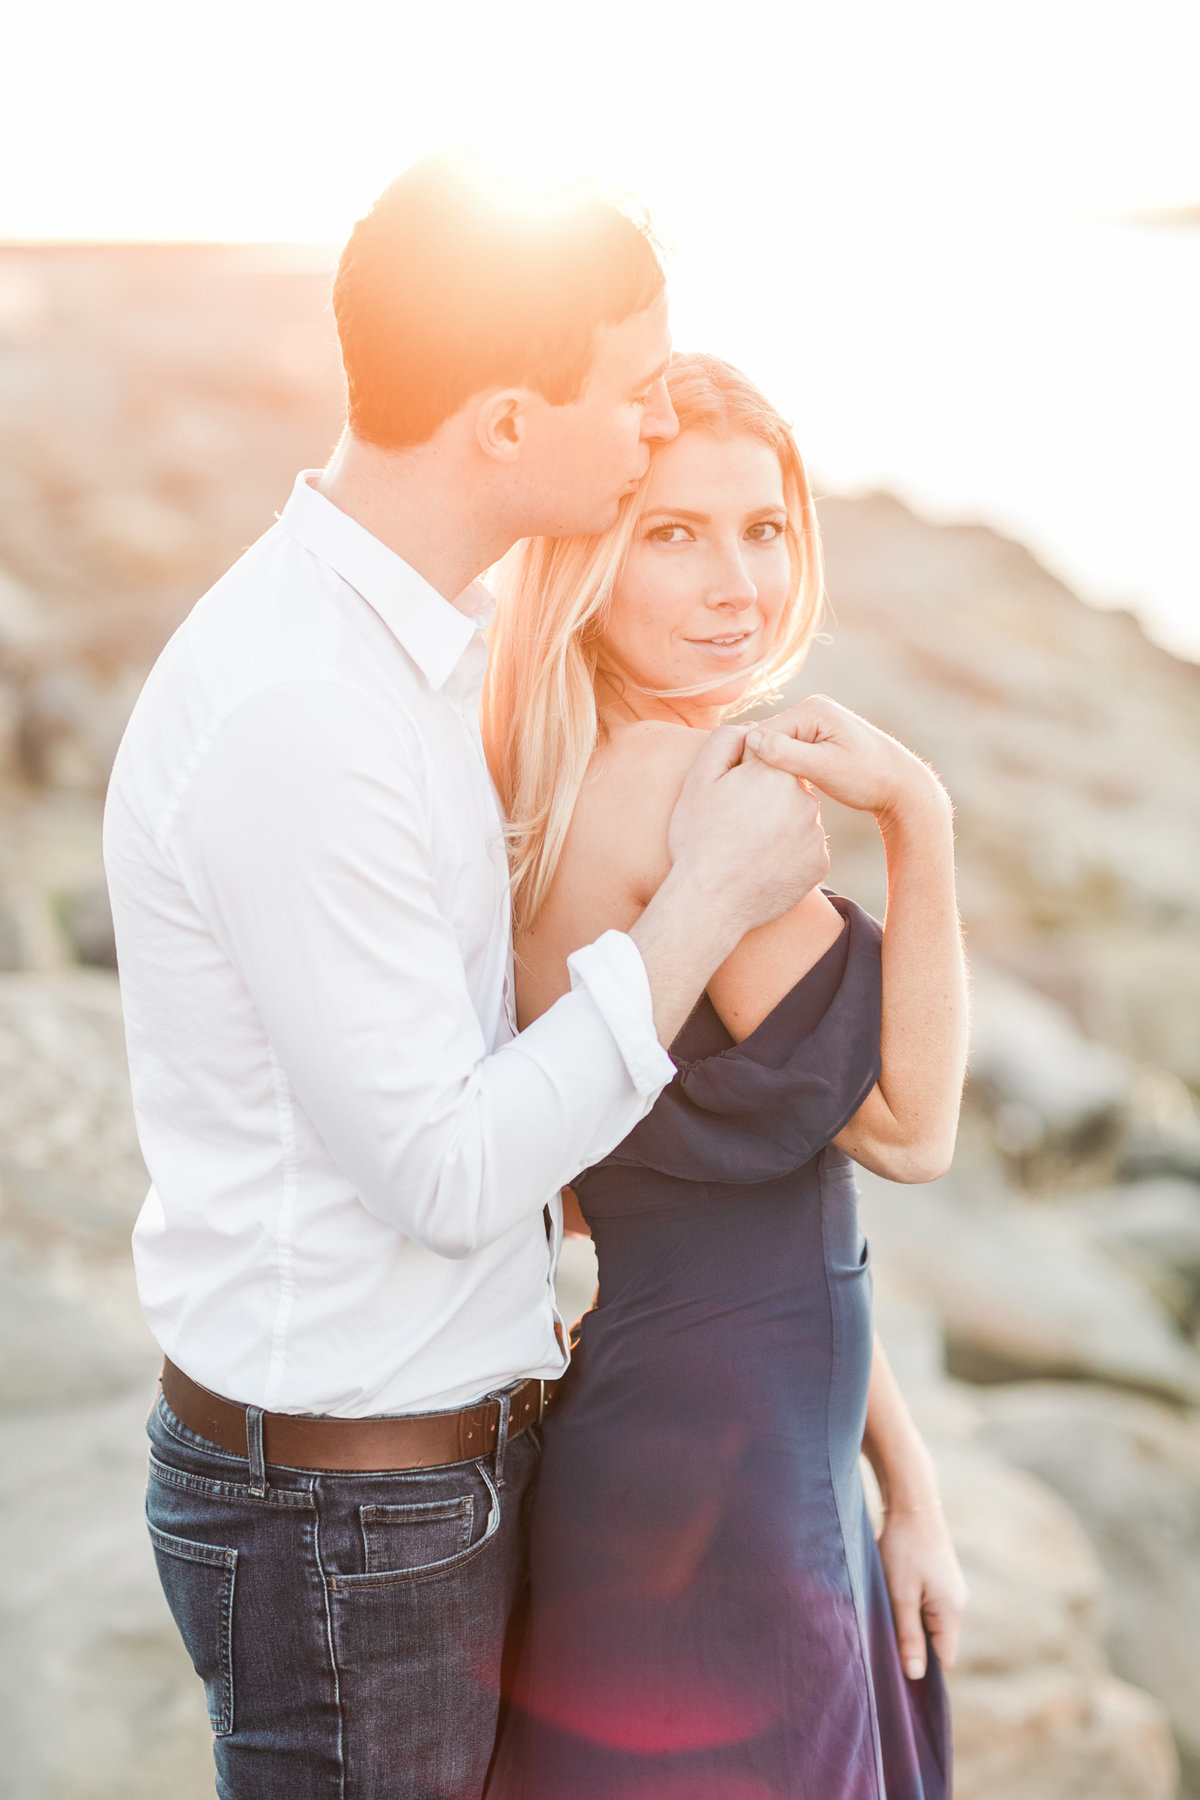 Venice Canal Beach Engagement Session_Valorie Darling Photography-7003